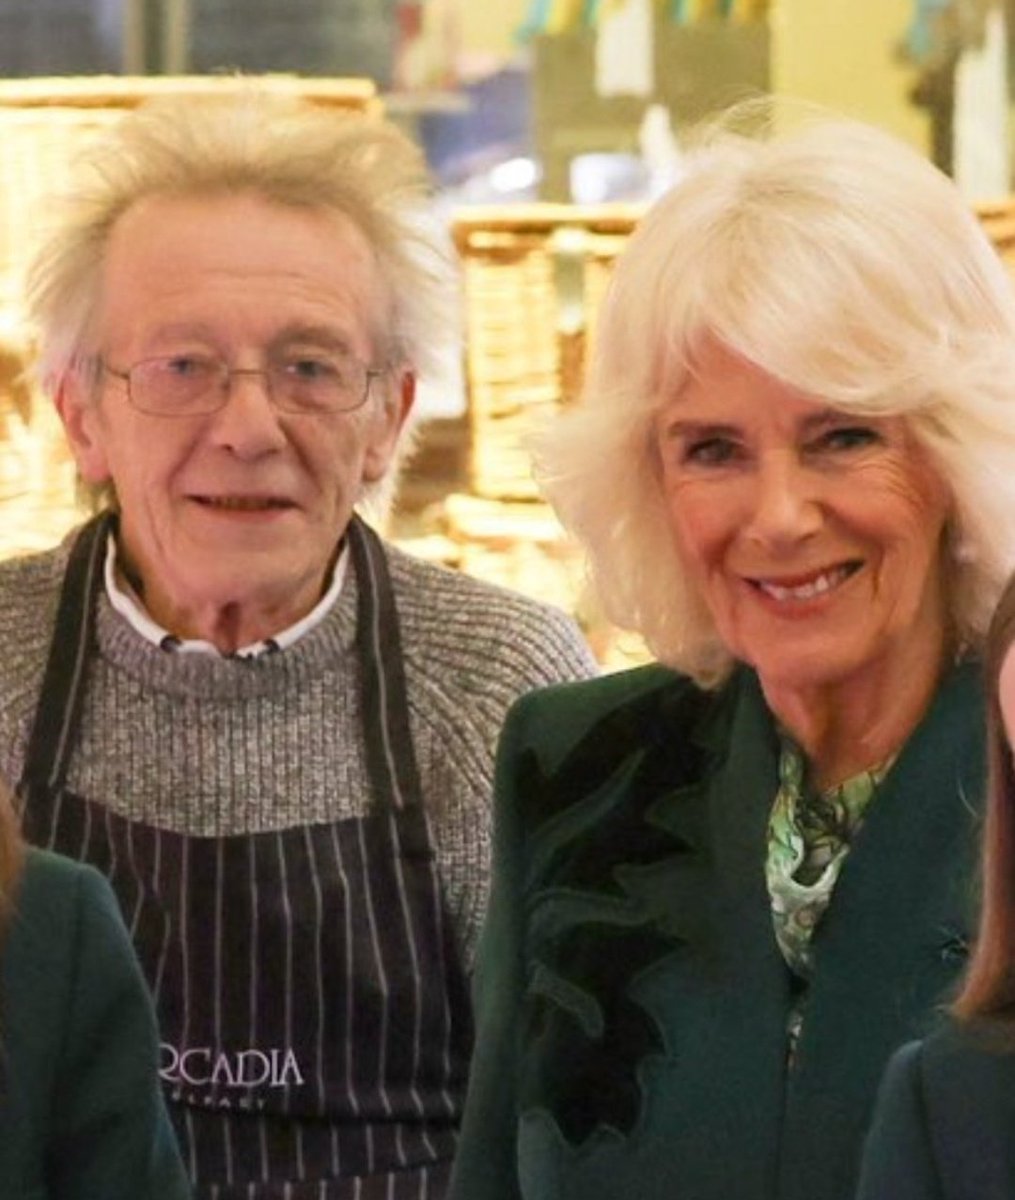 @Arcadiadeli although we didn't get a personal visit from @RoyalFamily Queen Camilla, it's nice to see my very own produce photographed. Here, Arcadia's Billy sports a rather dashing haircut (by yours truly) right beside the Royal visitor herself.